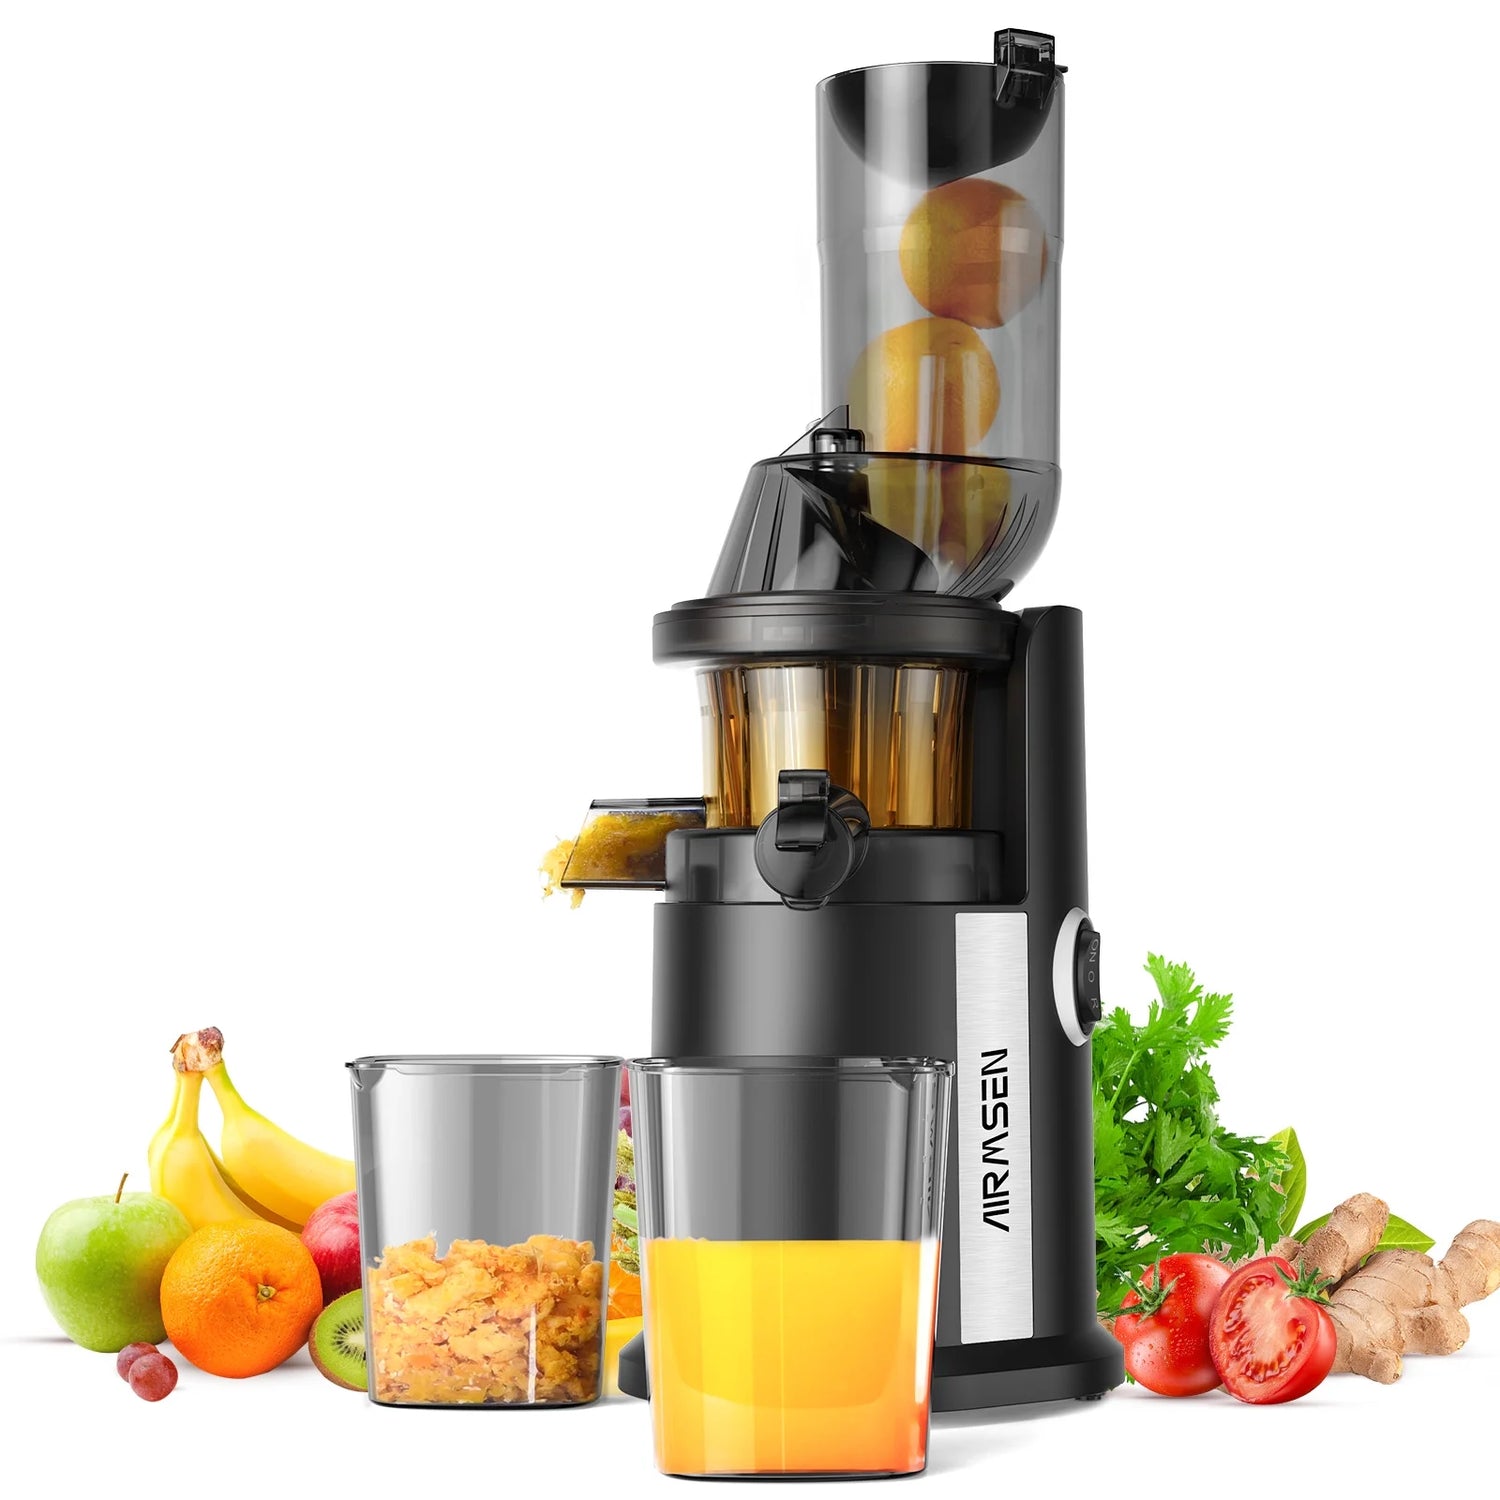 Cold Press Juicer Machine with Big Wide 82mm Chute, BPA-Free